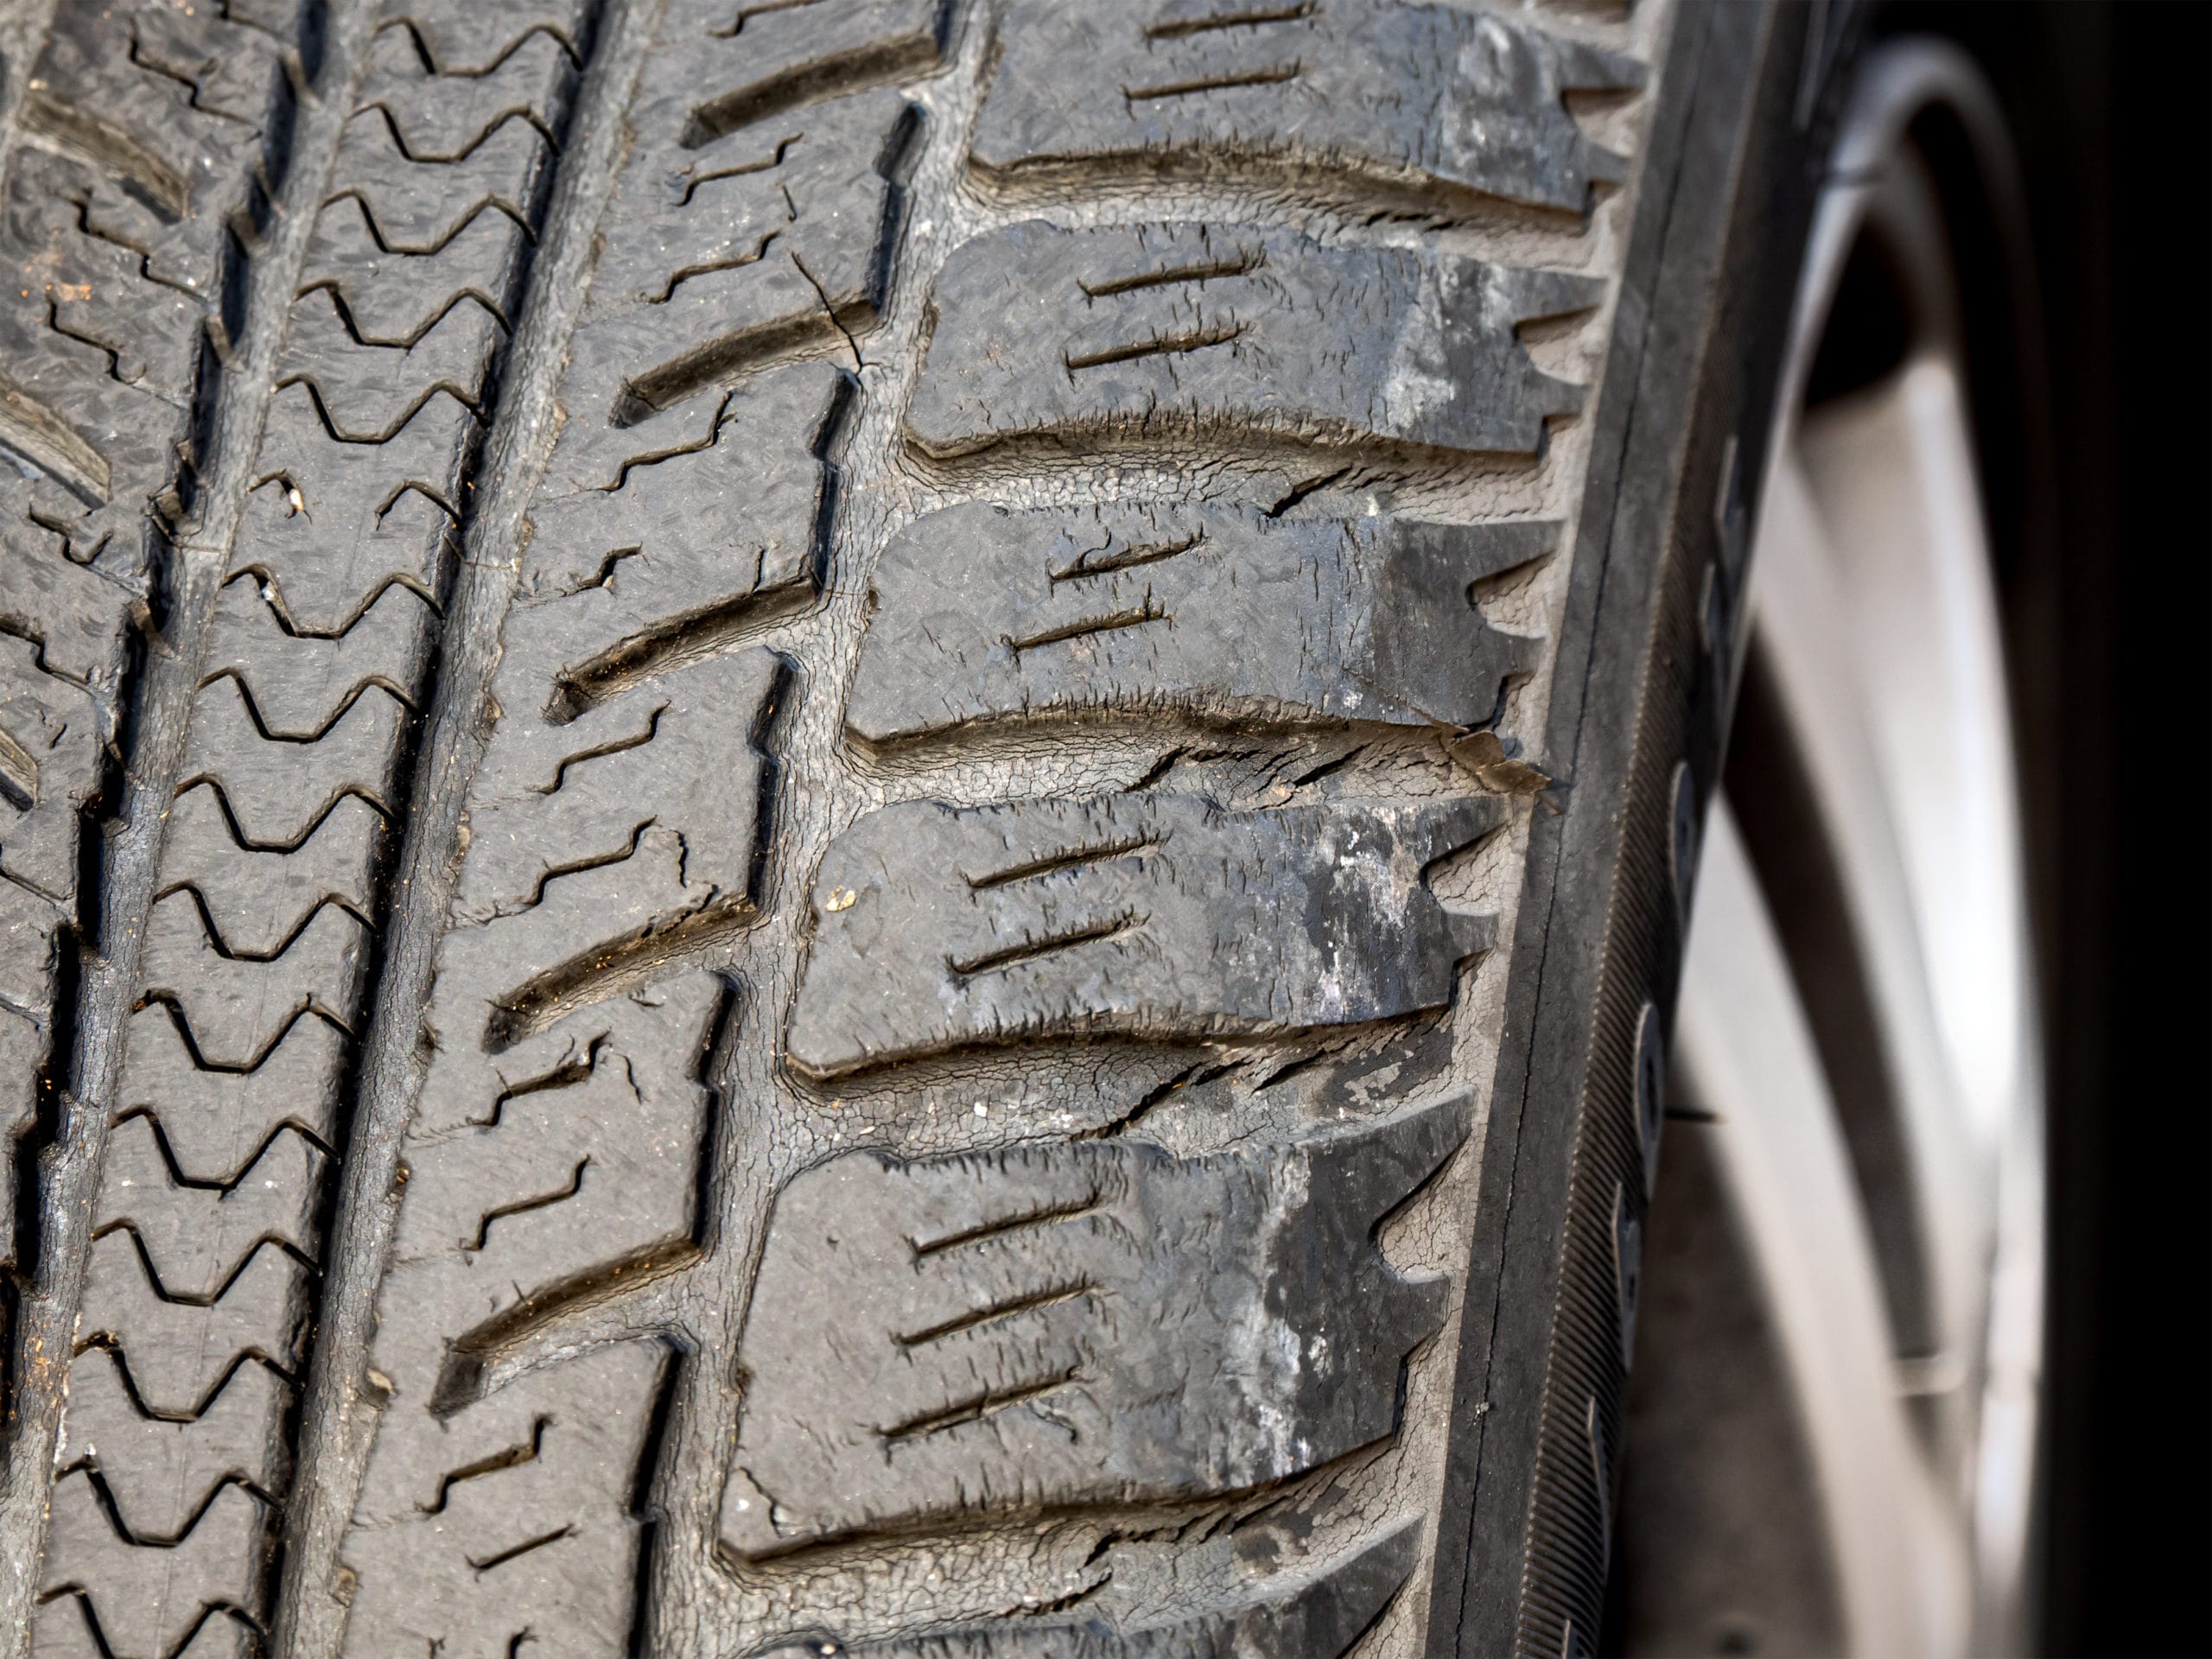 Old, Worn and Cracked tire tread, Poor Drivability and High Risk of Traffic Accident